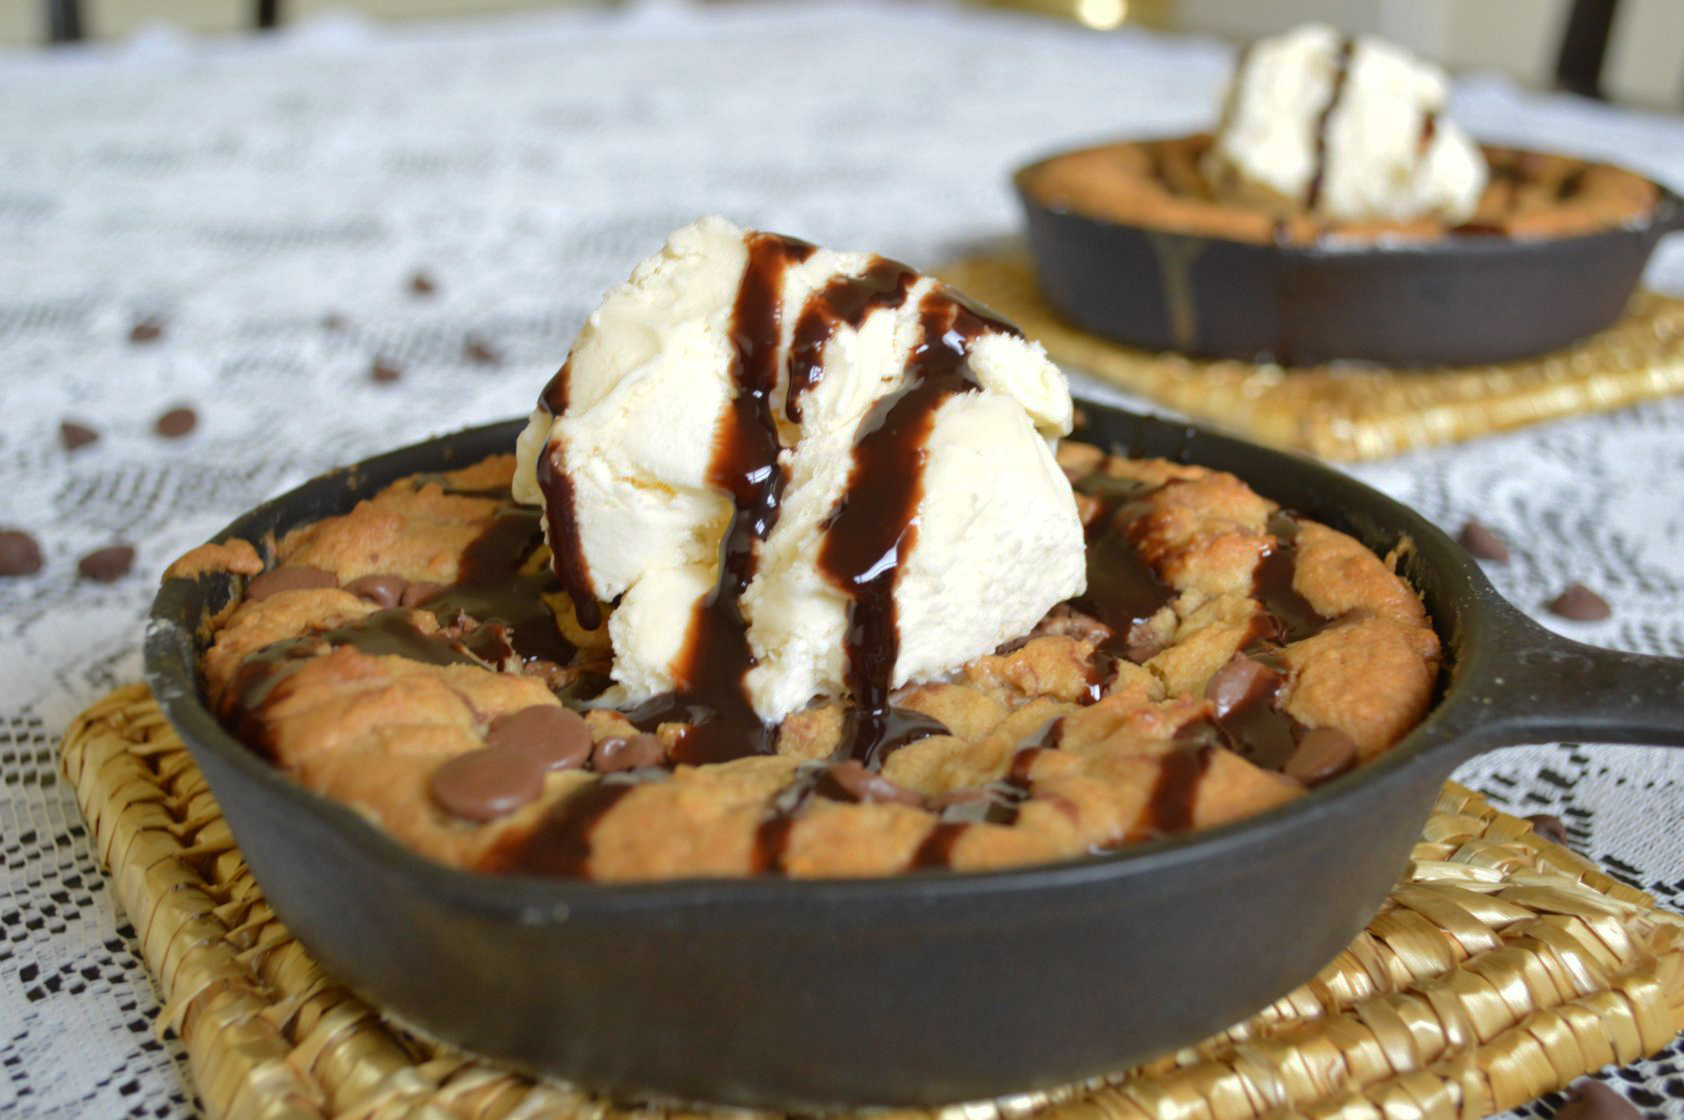 https://thekreativelife.com/wp-content/uploads/2015/01/Cast-Iron-Skillet-Chocolate-Chip-Cookie-The-Kreative-Life.jpg